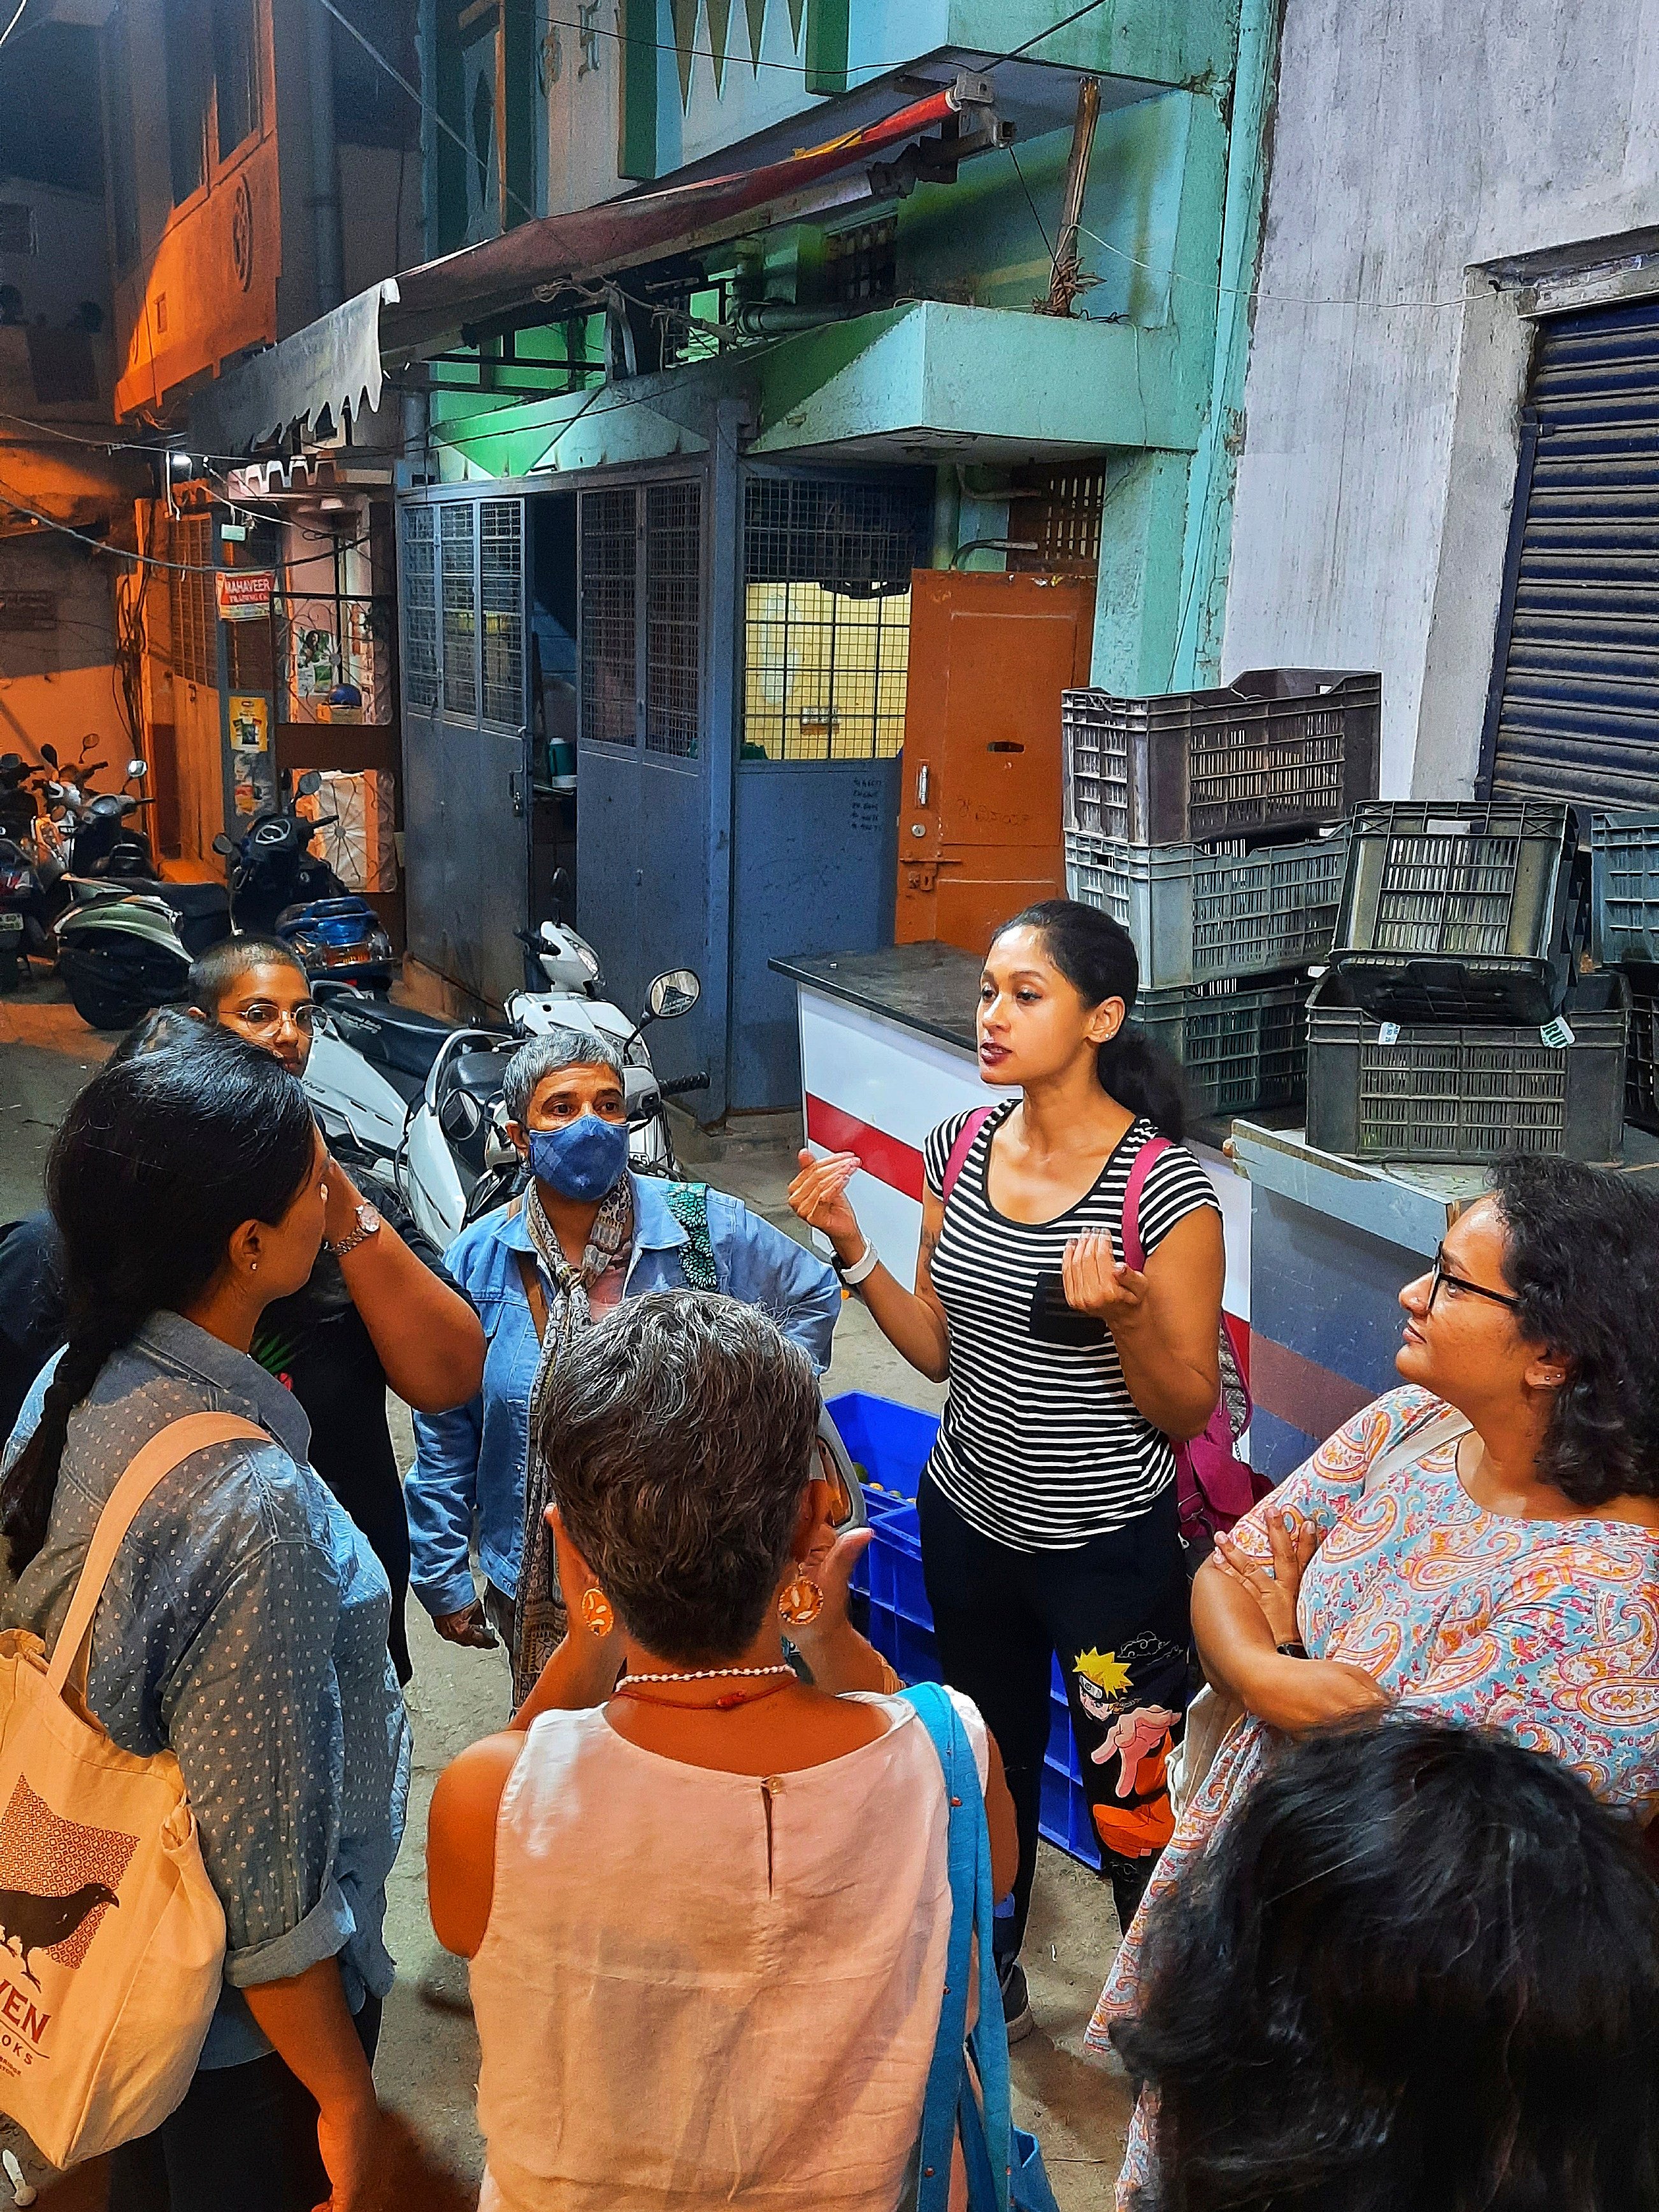 Parvathi Bhat Giliyal of Gully Tours (second right) speaks to a group of women during the “Pete by Night for Women by Women” walk in Bangalore, India, on March 25, 2023. Photo: Anita Rao Kashi